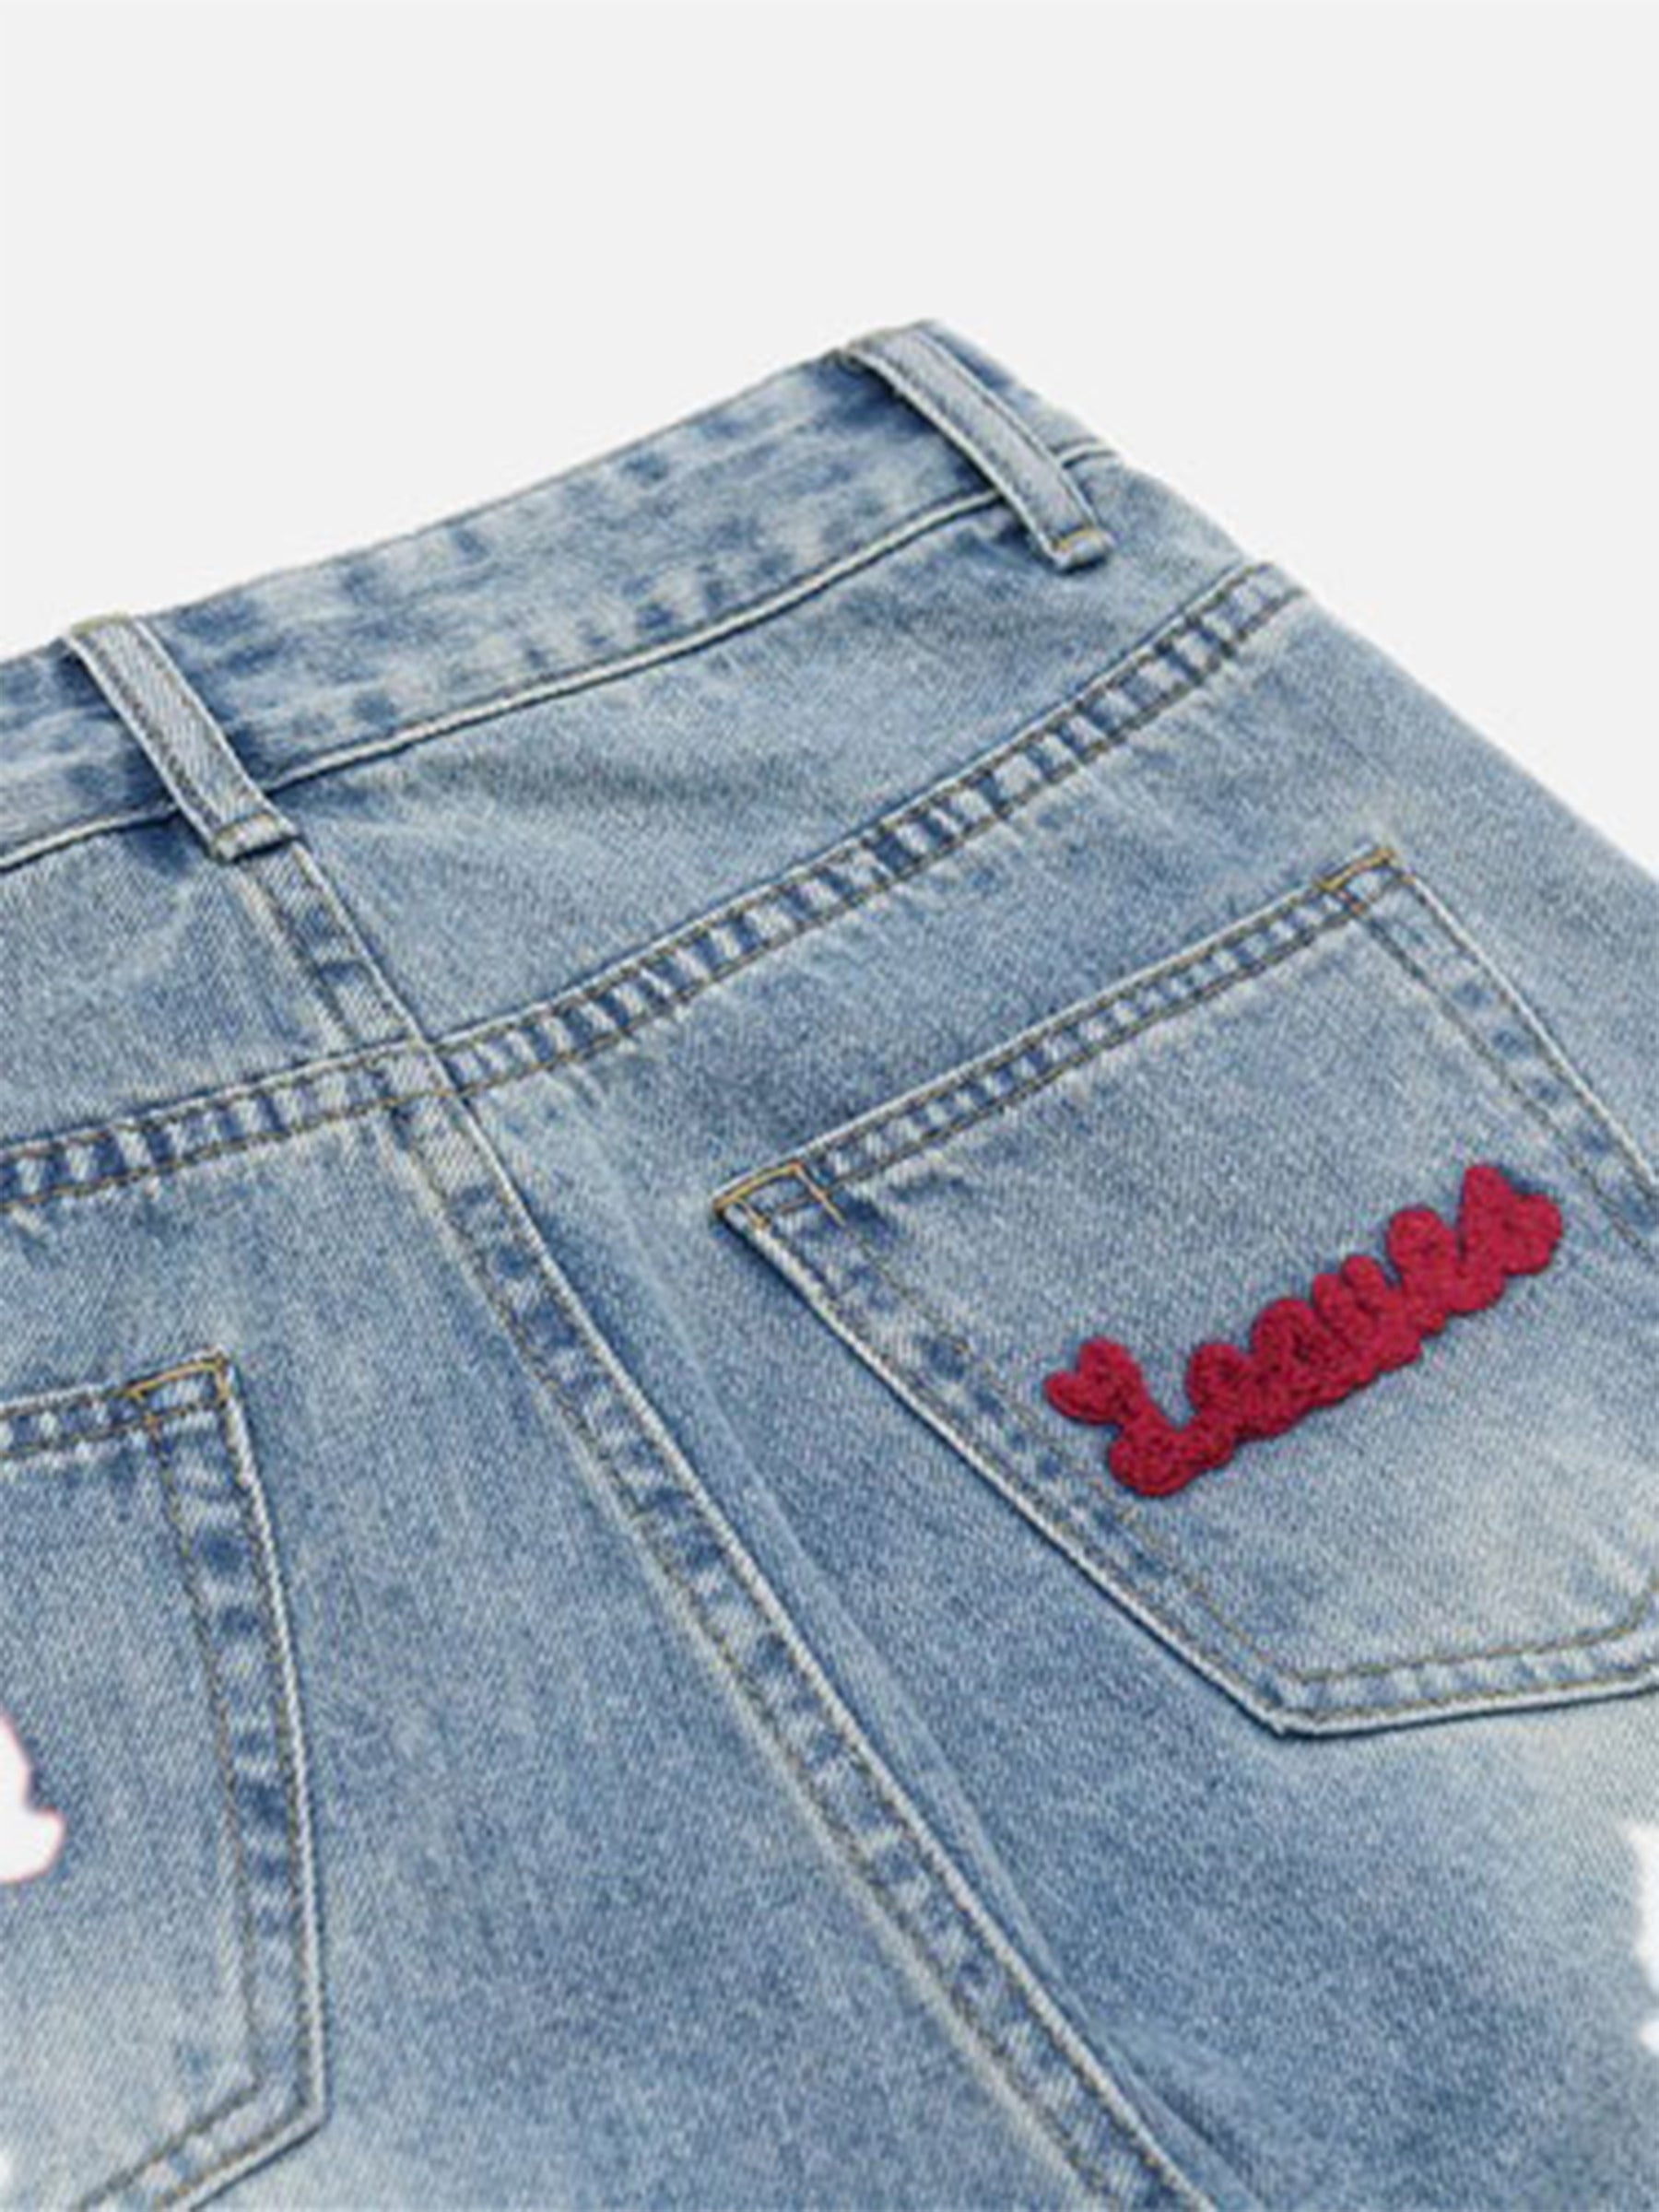 LUXENFY™ - American Hip-hop Full Of Printed Letters Towel Embroidery Casual Jeans-1483 luxenfy.com